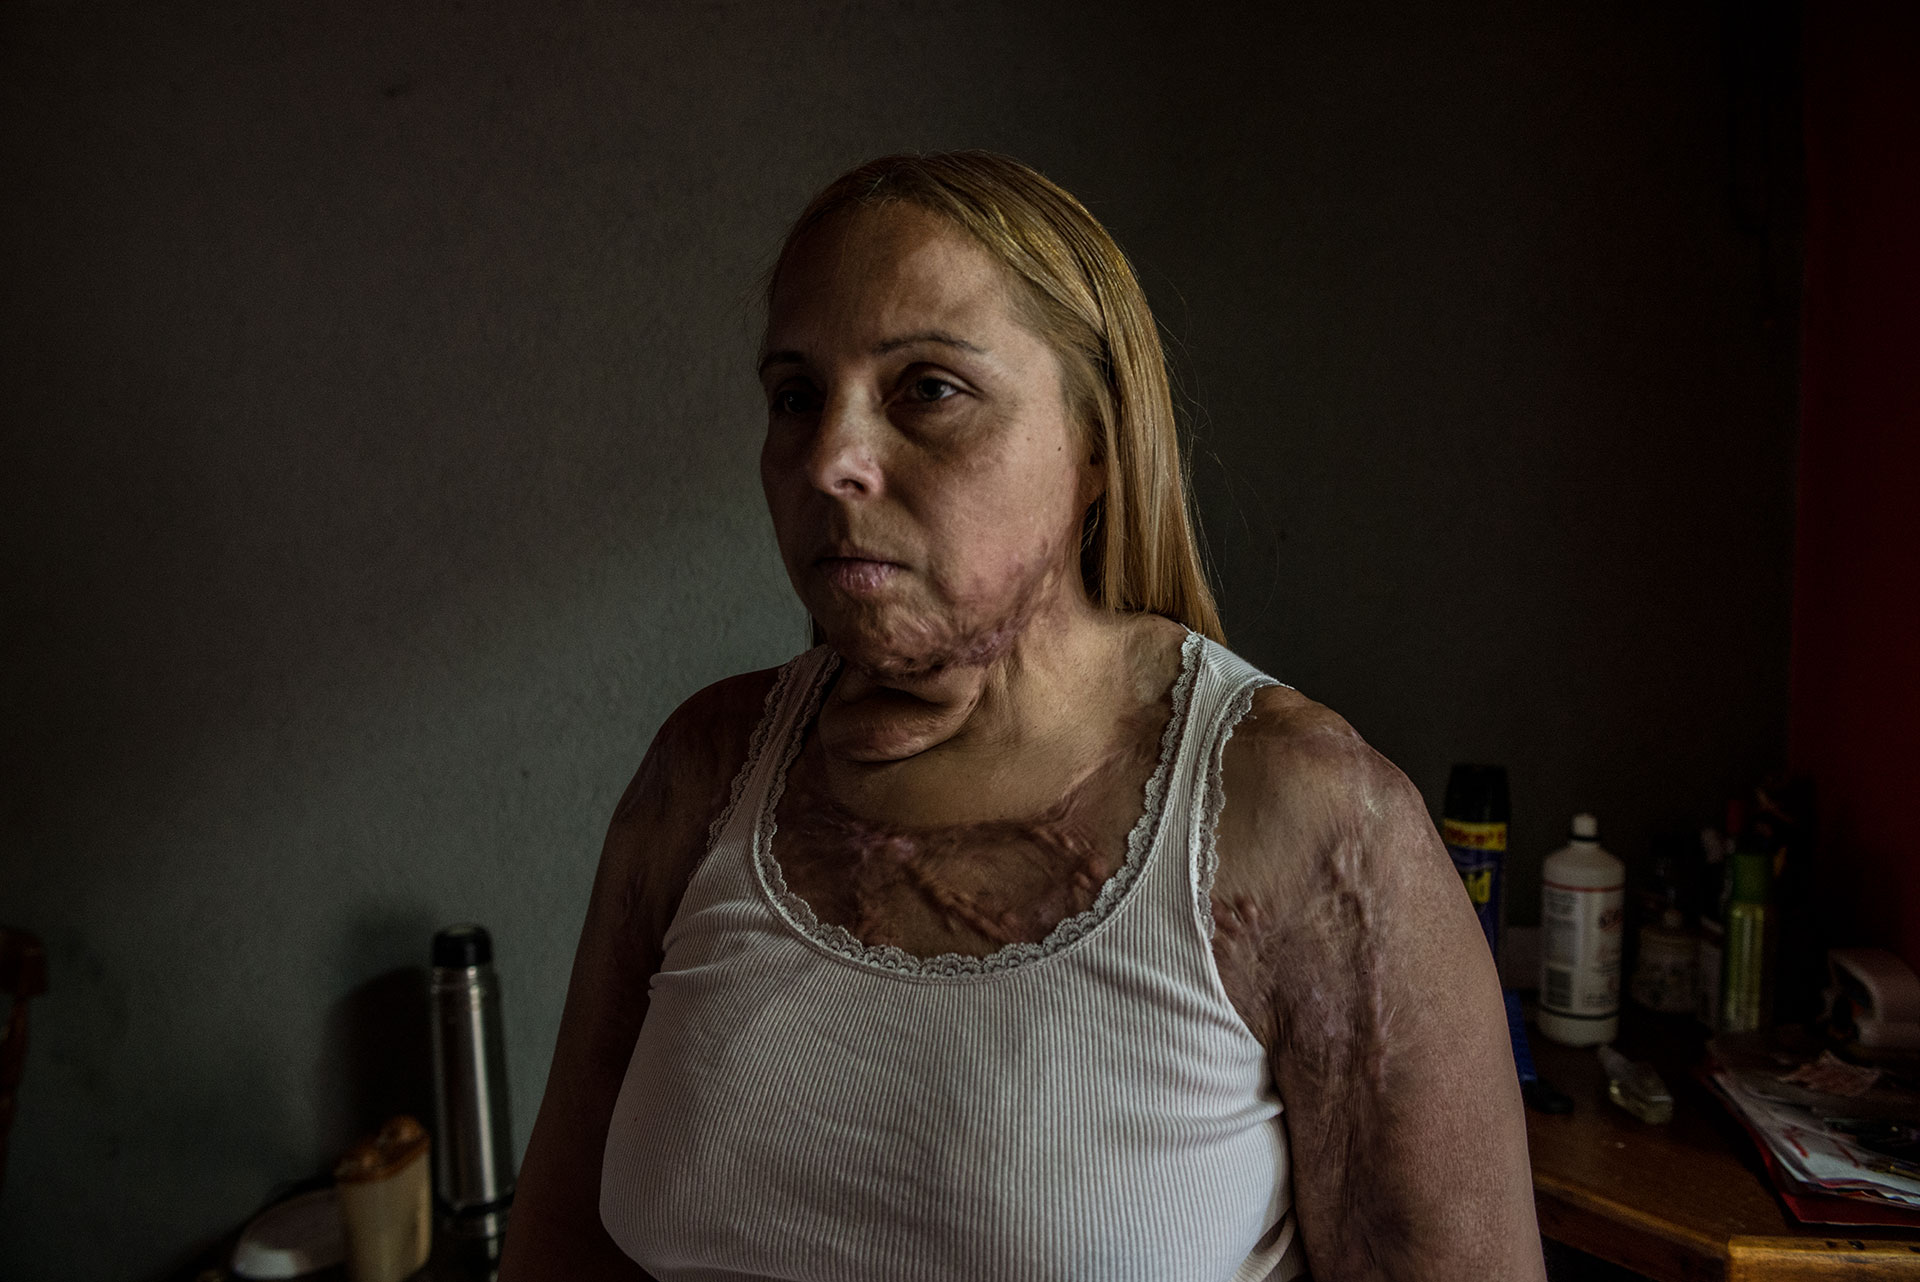 Karina Abregu was burned by her husband, who is an alcoholic after 11 years of violence. Currently cannot work because of her health conditions and she doesn’t receive any kind of help from the government. She is fighting for her rights supported from her sister Carolina.